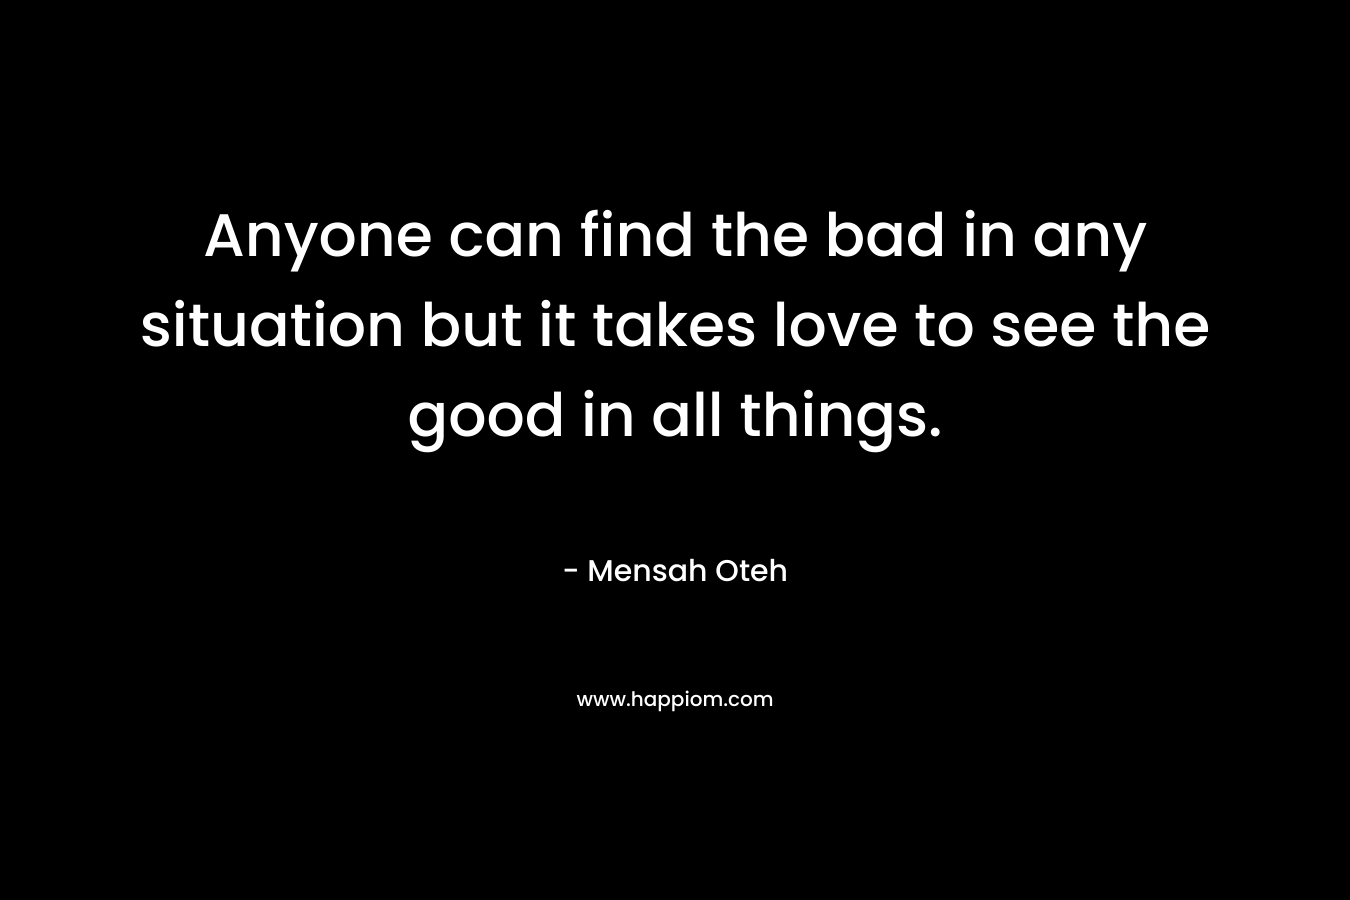 Anyone can find the bad in any situation but it takes love to see the good in all things.